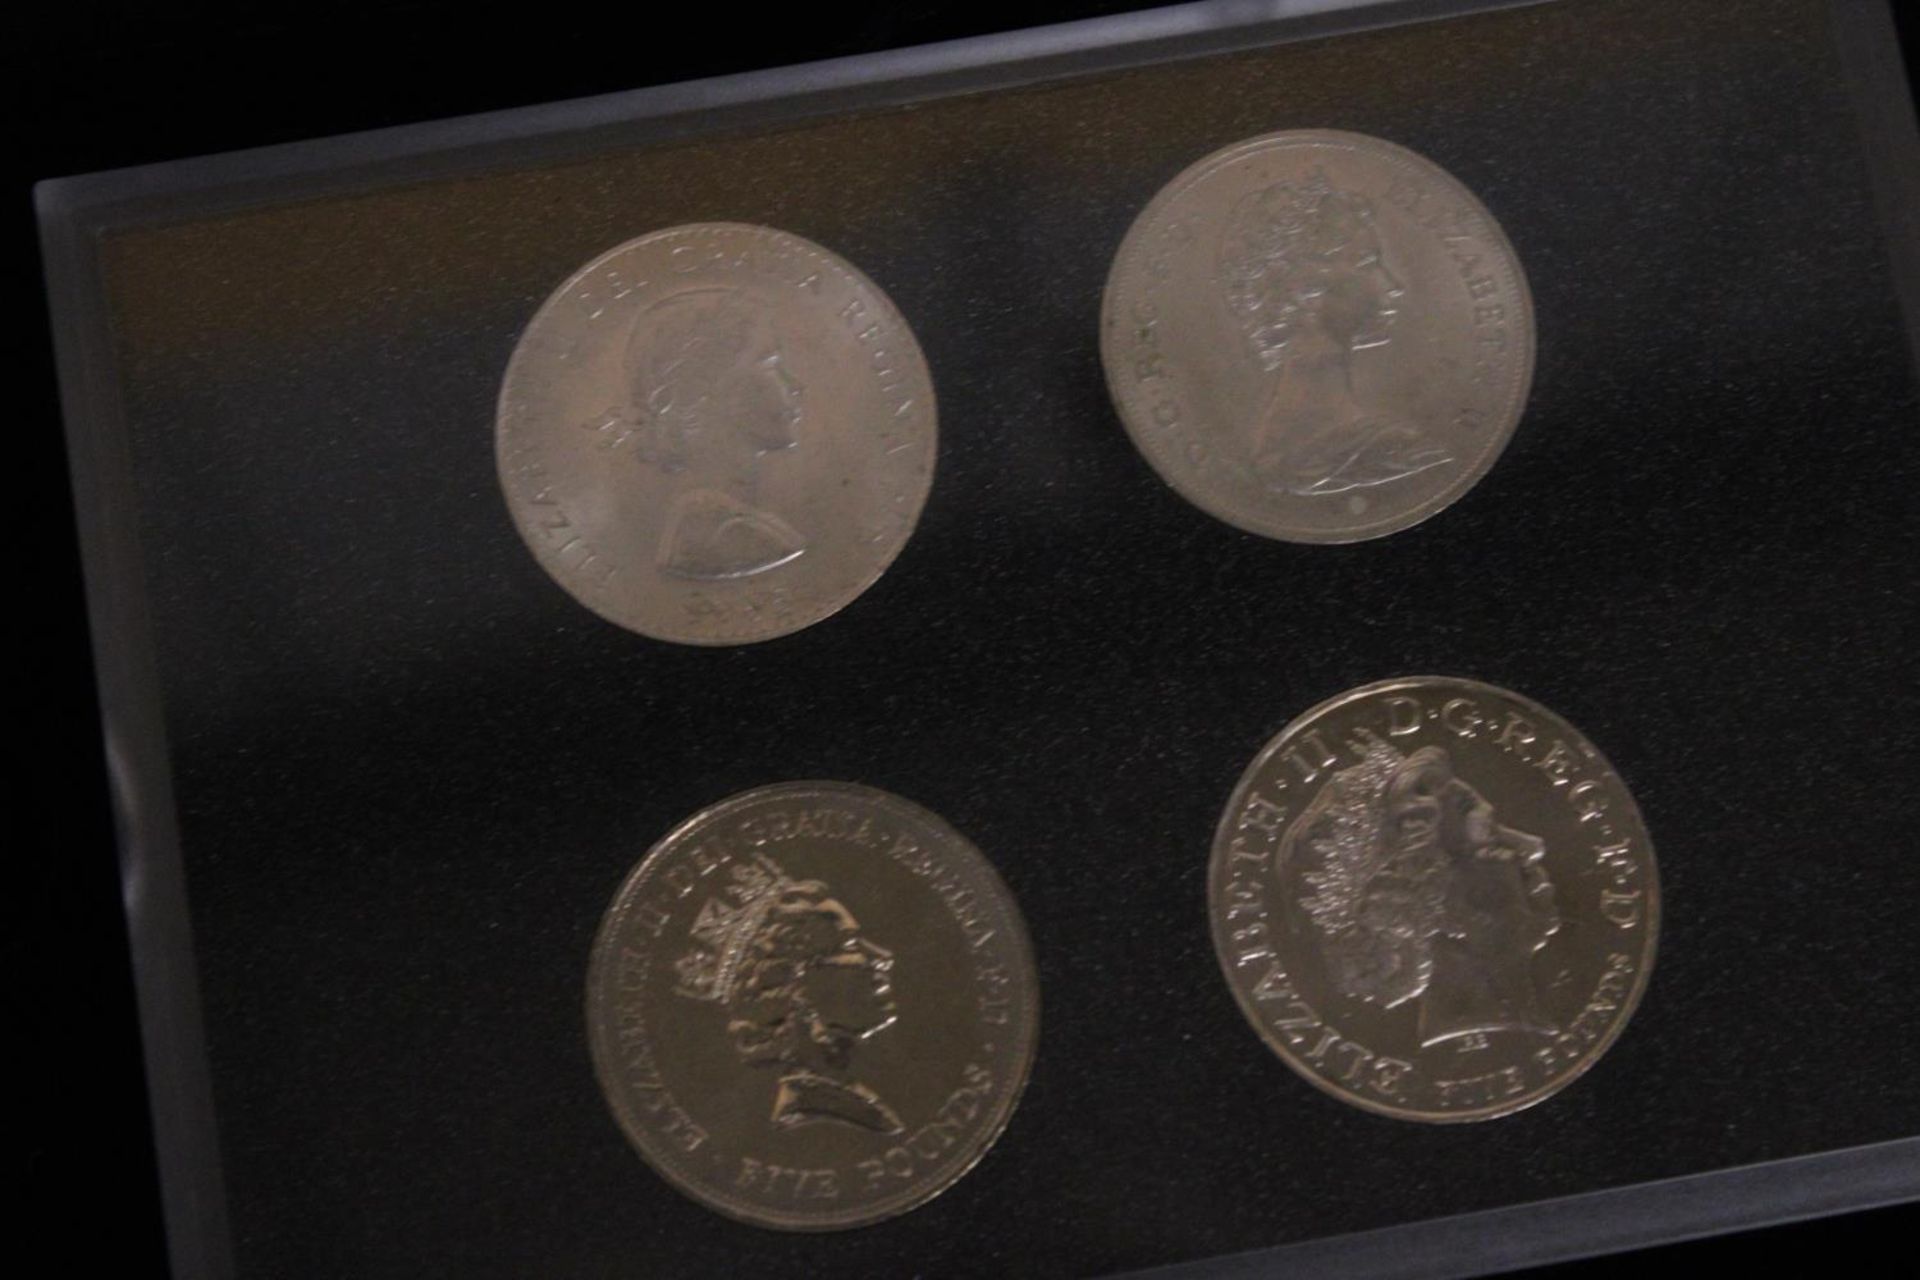 A WESTMINSTER BOXED FOUR COIN SET "THE PORTRAITS OF A QUEEN" WITH CERTIFICATE OF AUTHENTICITY - Image 3 of 5